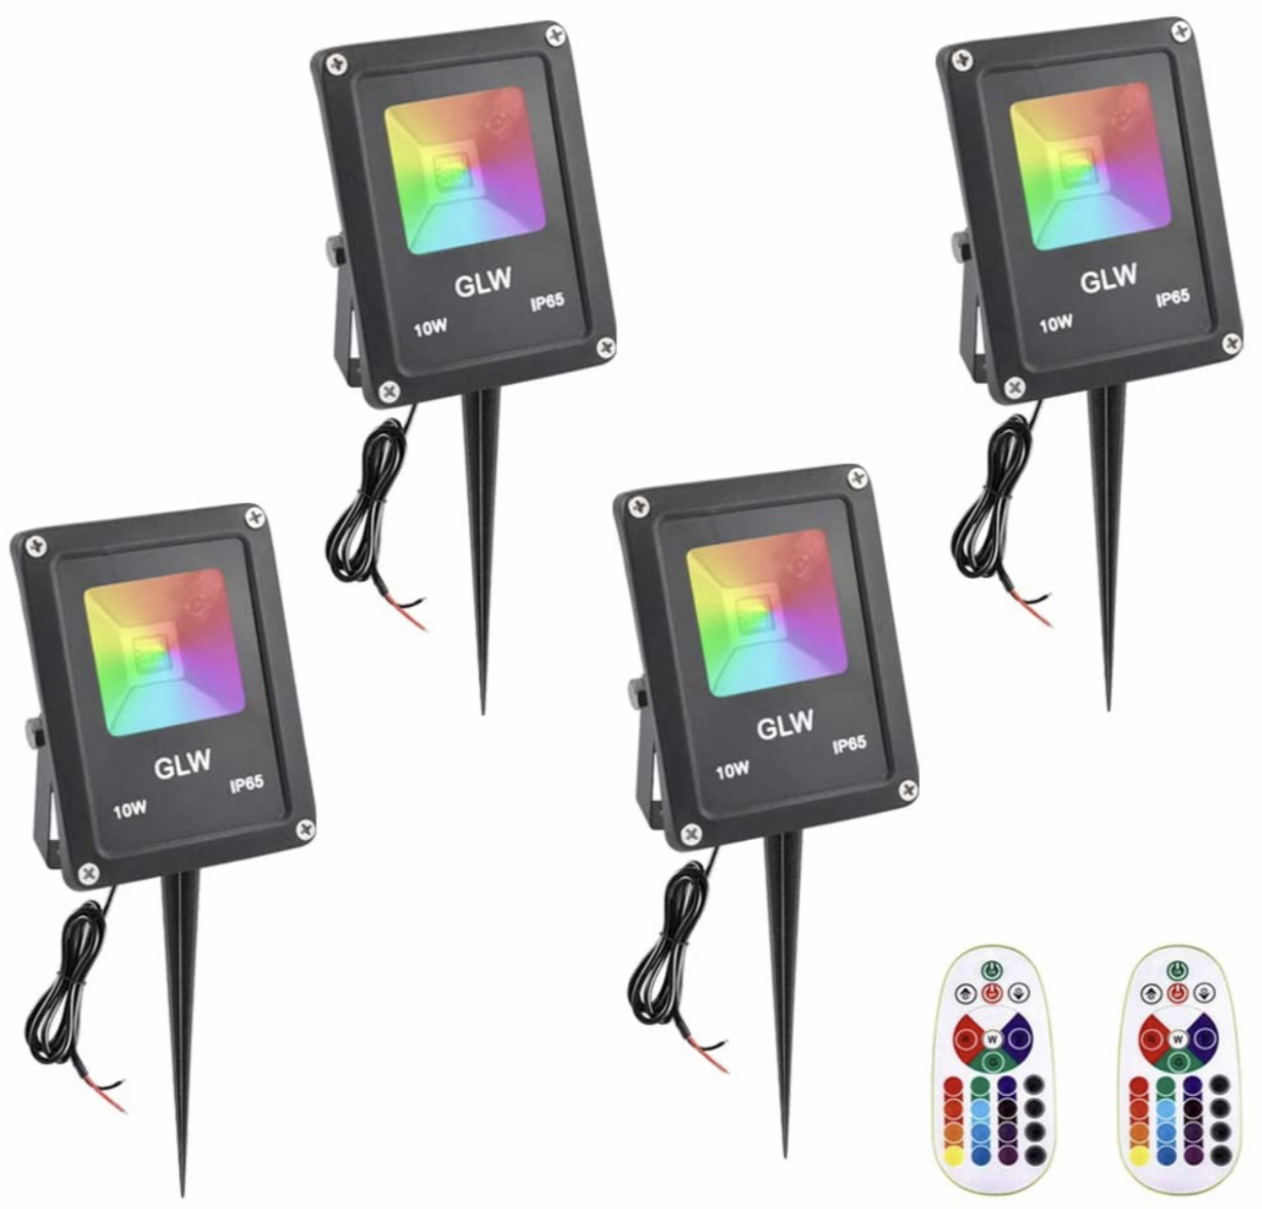 GLW GPD Landscape Lights 10W Color Changing Flood Light with Remote Control IP65 Waterproof 16 Colors Changing 4 Mode 12V Outdoor Spotlight and More [4 Pack]